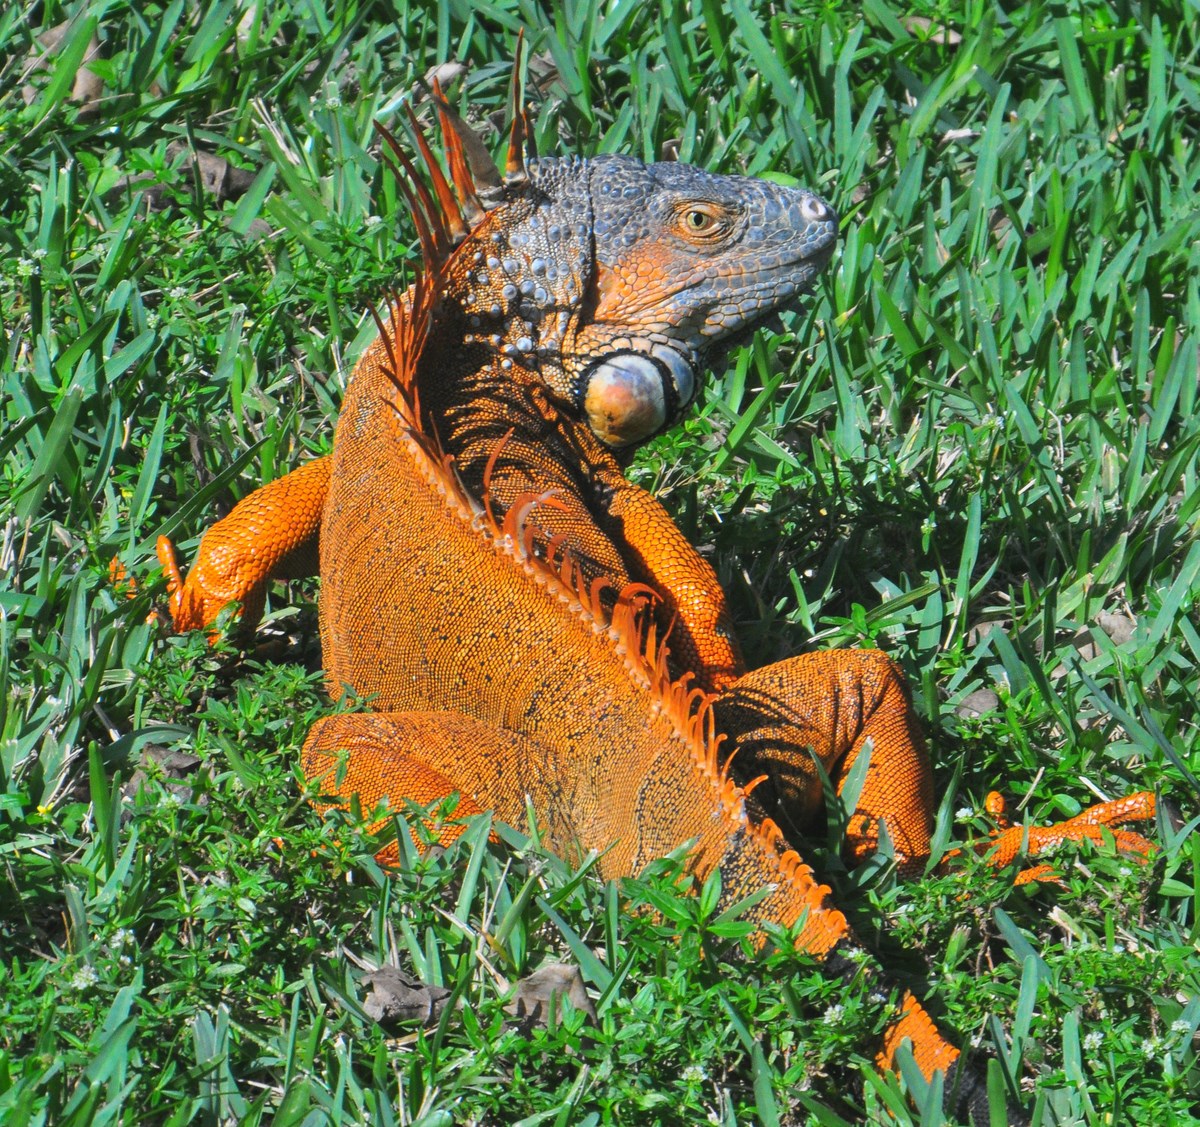 "Iguana in Enchanted Forest Park, North Miami, Florida"